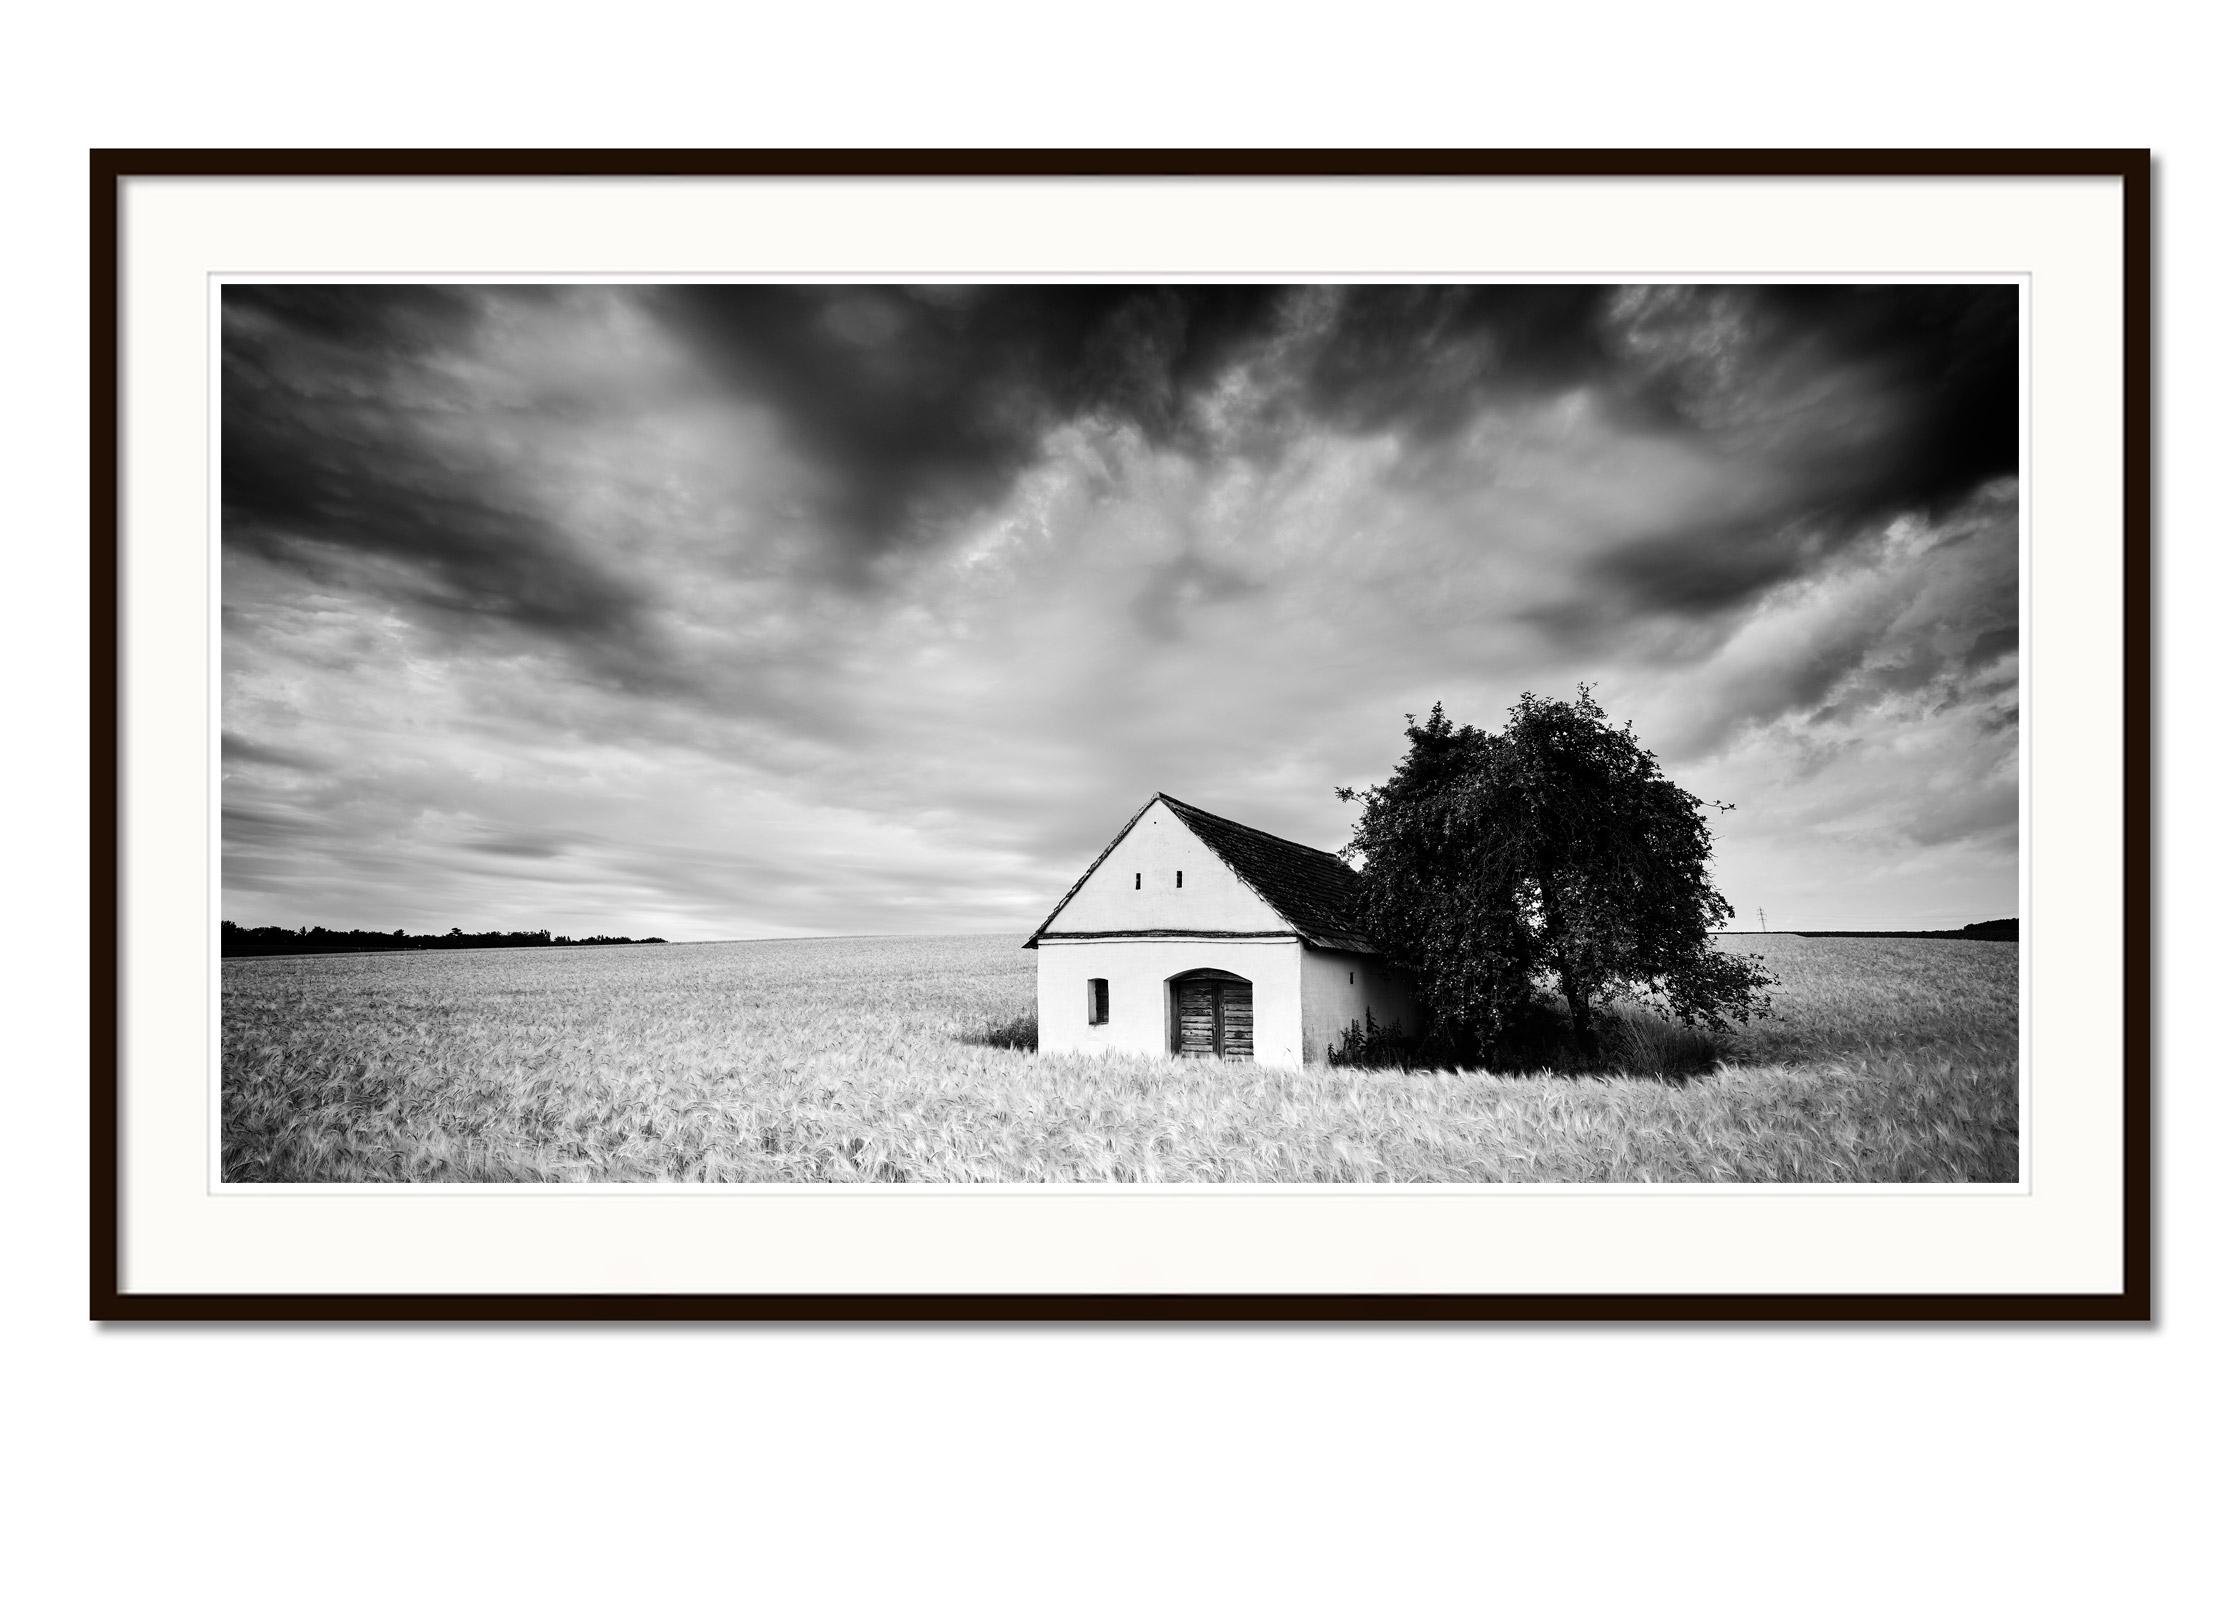 Black and white fine art long exposure landscape photography. Lonely wine press house in the corn field with spectacular clouds, Weinviertel, Austria. Archival pigment ink print, edition of 7. Signed, titled, dated and numbered by artist.